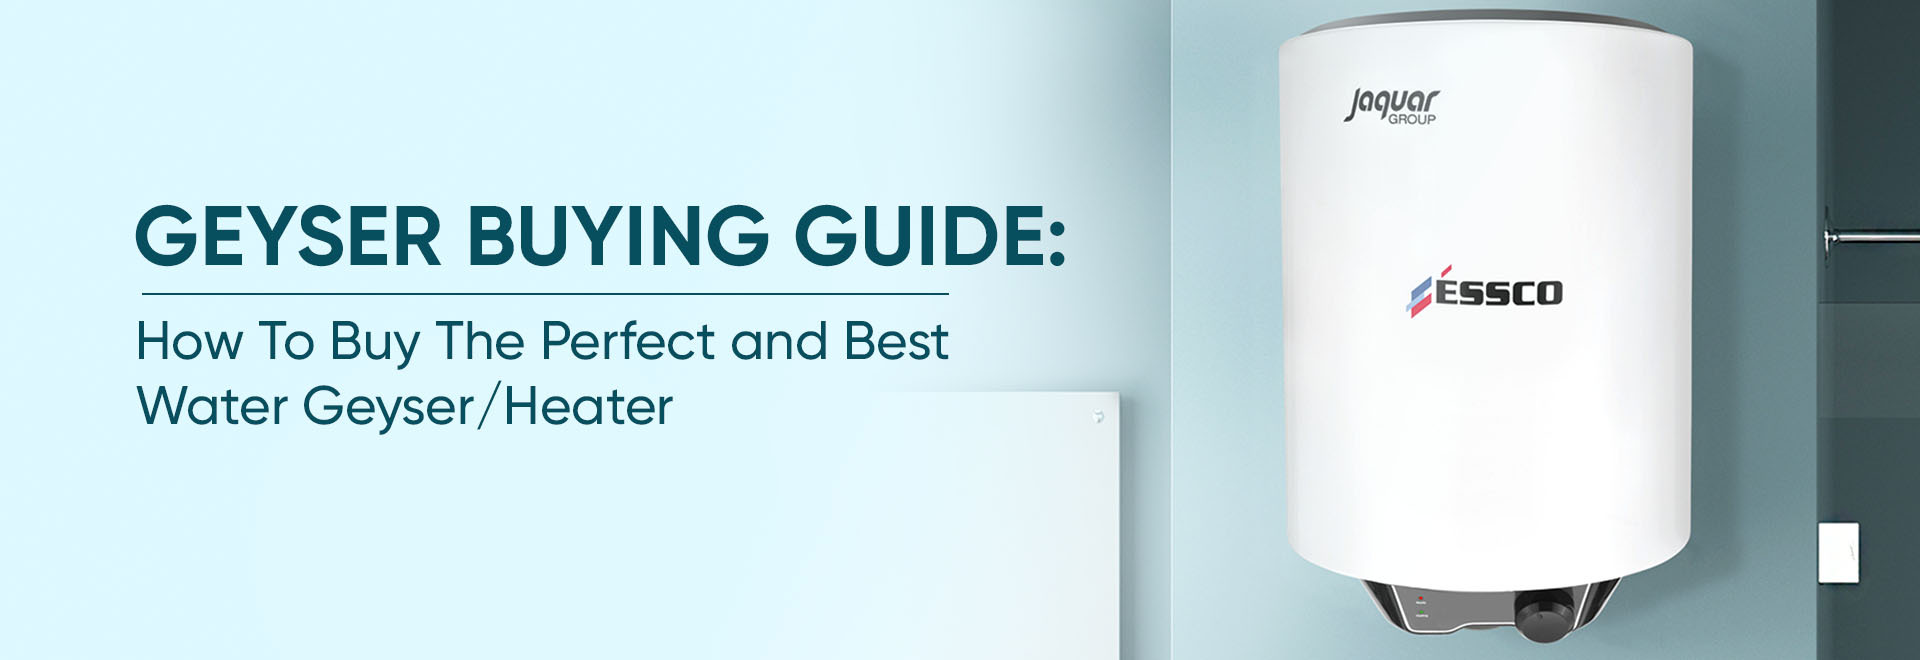 Geyser Buying Guide: How To Buy The Perfect Water Heater For Your Need